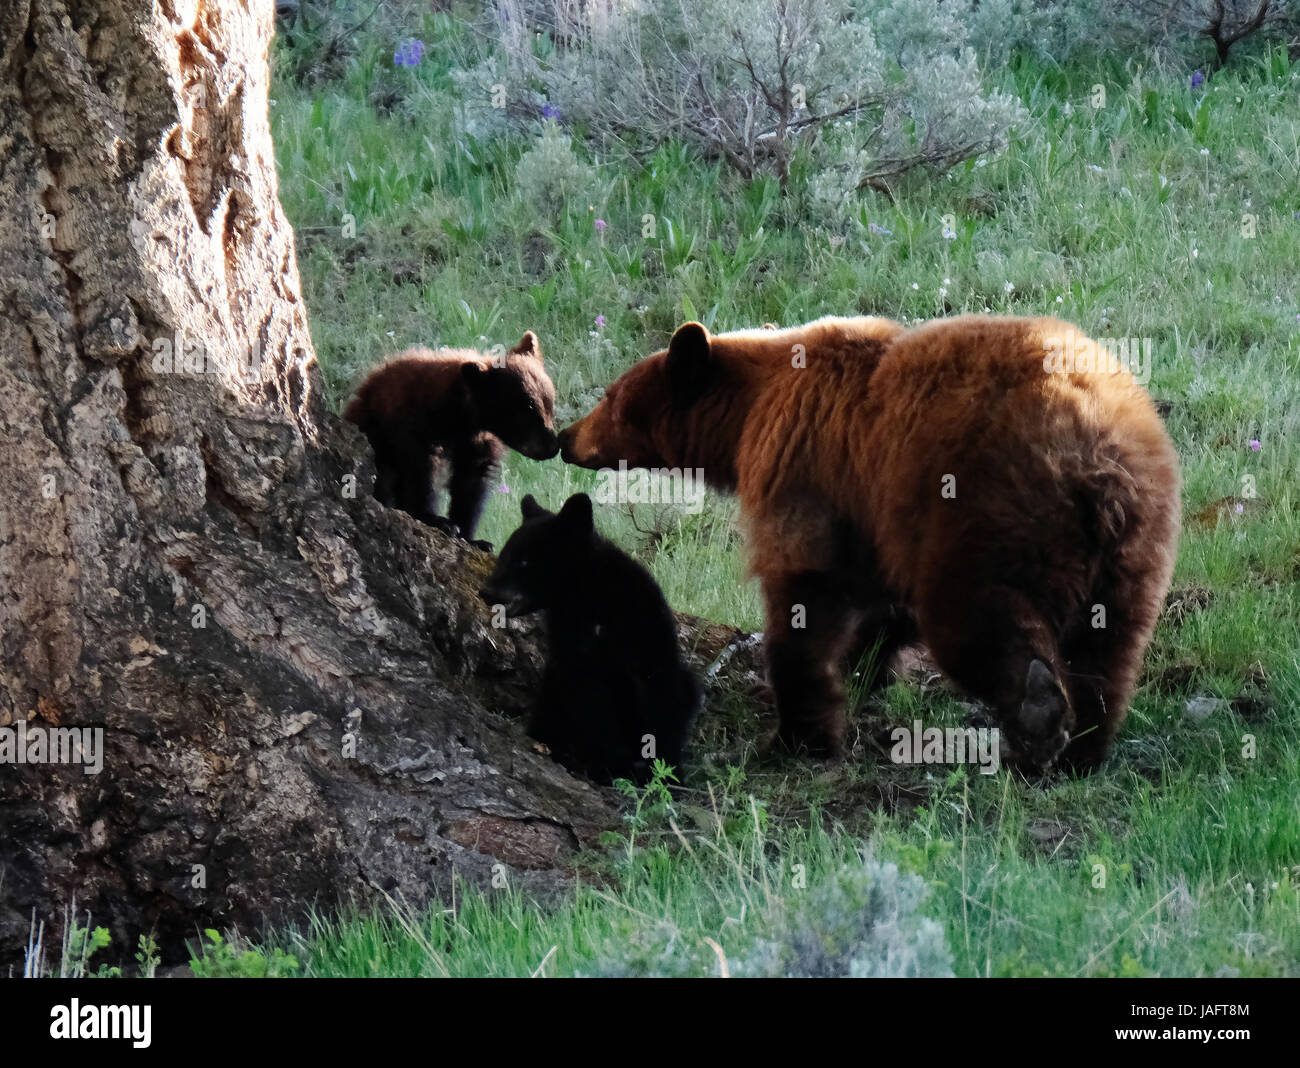 American Black Bear female sow (Ursus americanus) with cubs in Yellowstone National Park, Wyoming, USA. Stock Photo